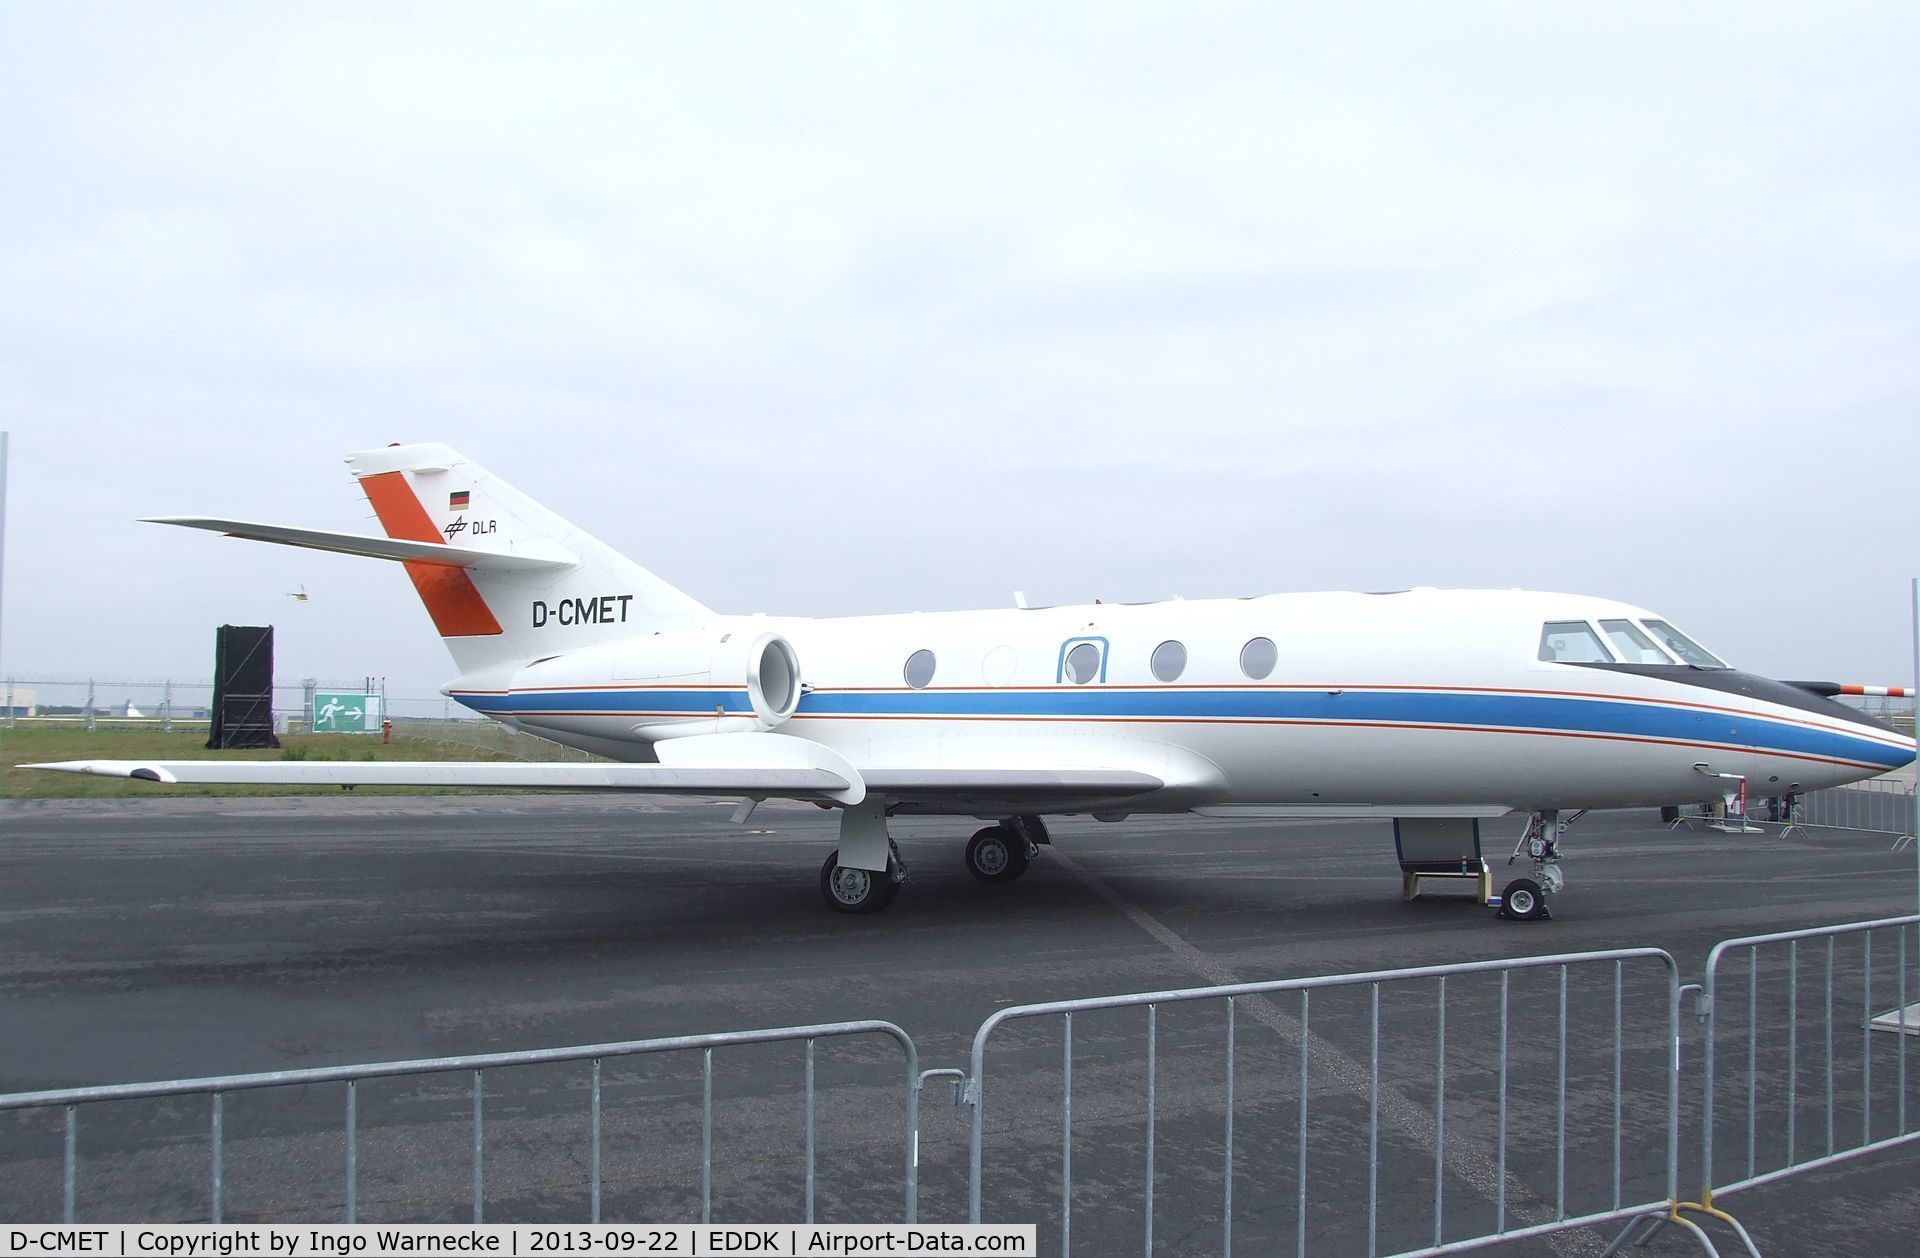 D-CMET, 1976 Dassault Falcon (Mystere) 20E-5 C/N 329, Dassault Falcon 20E-5 of the DLR at the DLR 2013 air and space day on the side of Cologne airport